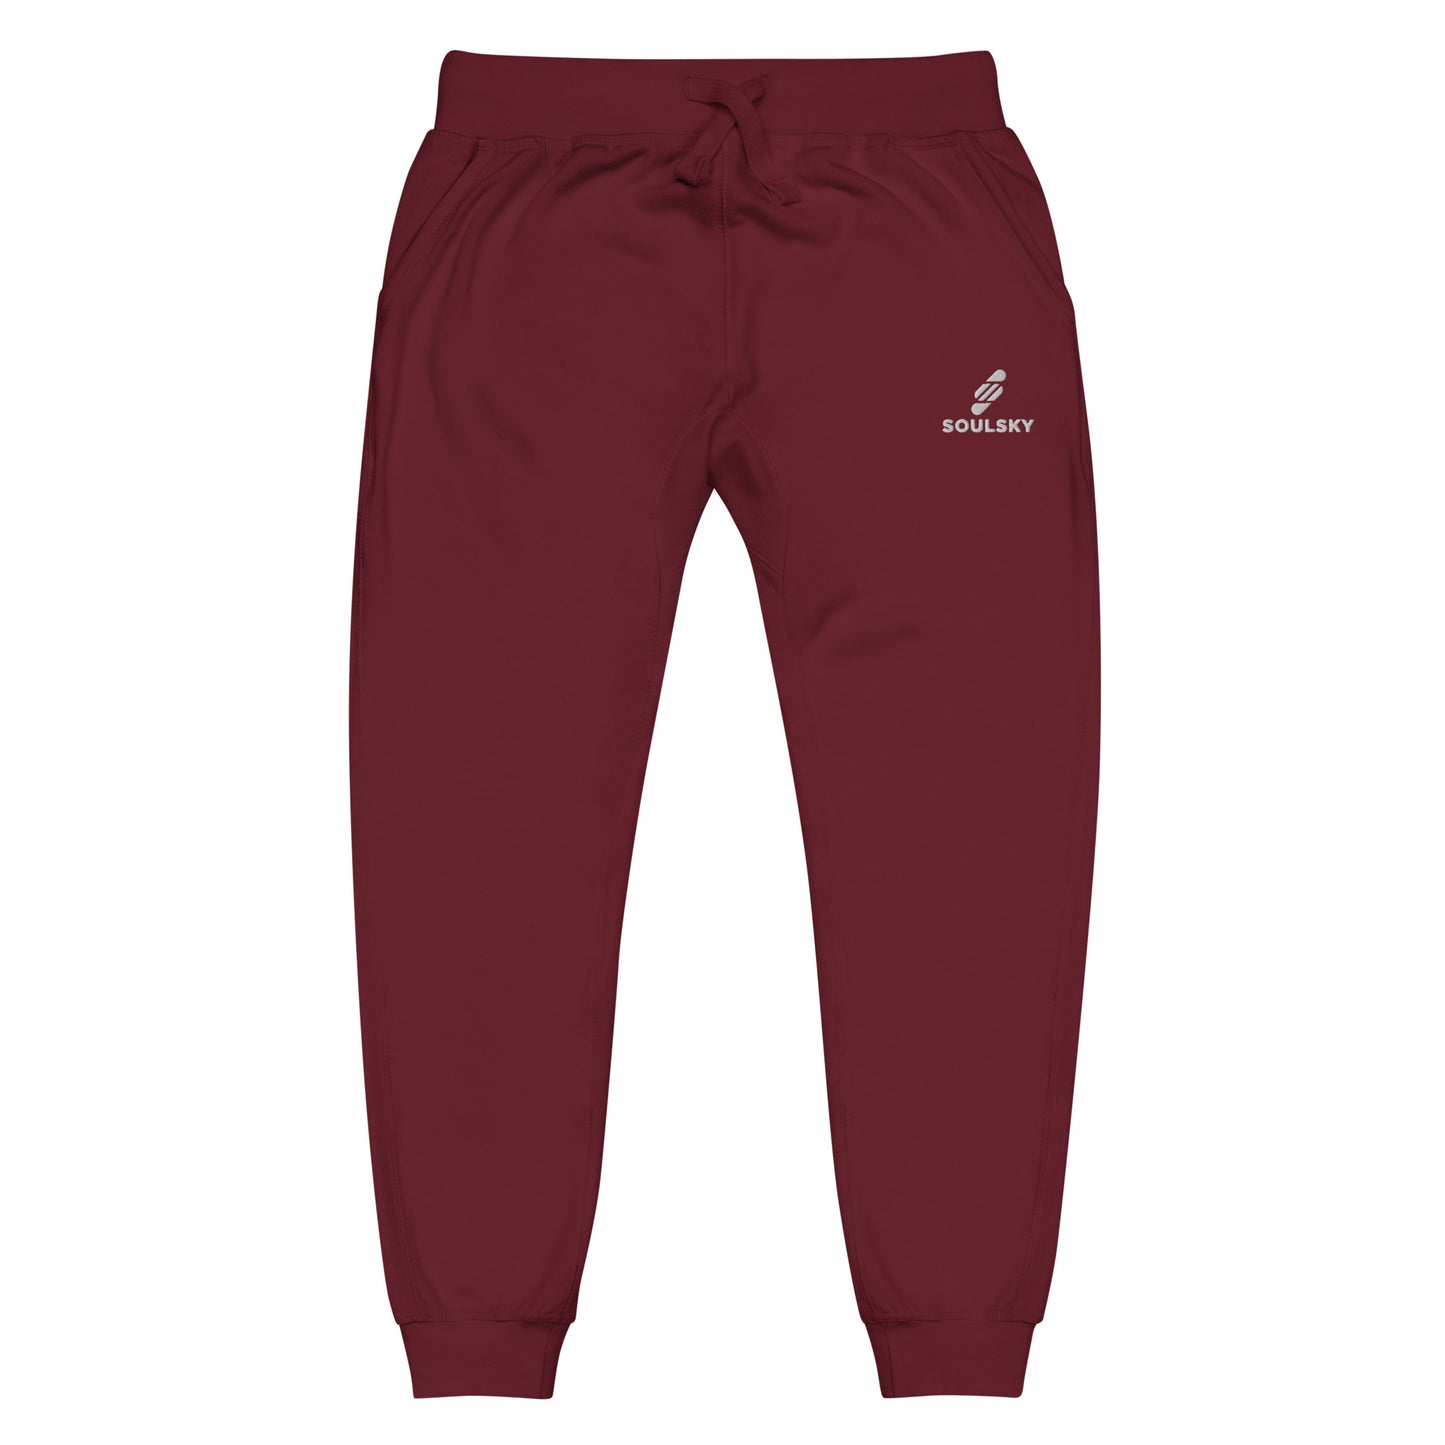 Maroon unisex joggers with white embroidered logo on left thigh that says "SOULSKY".